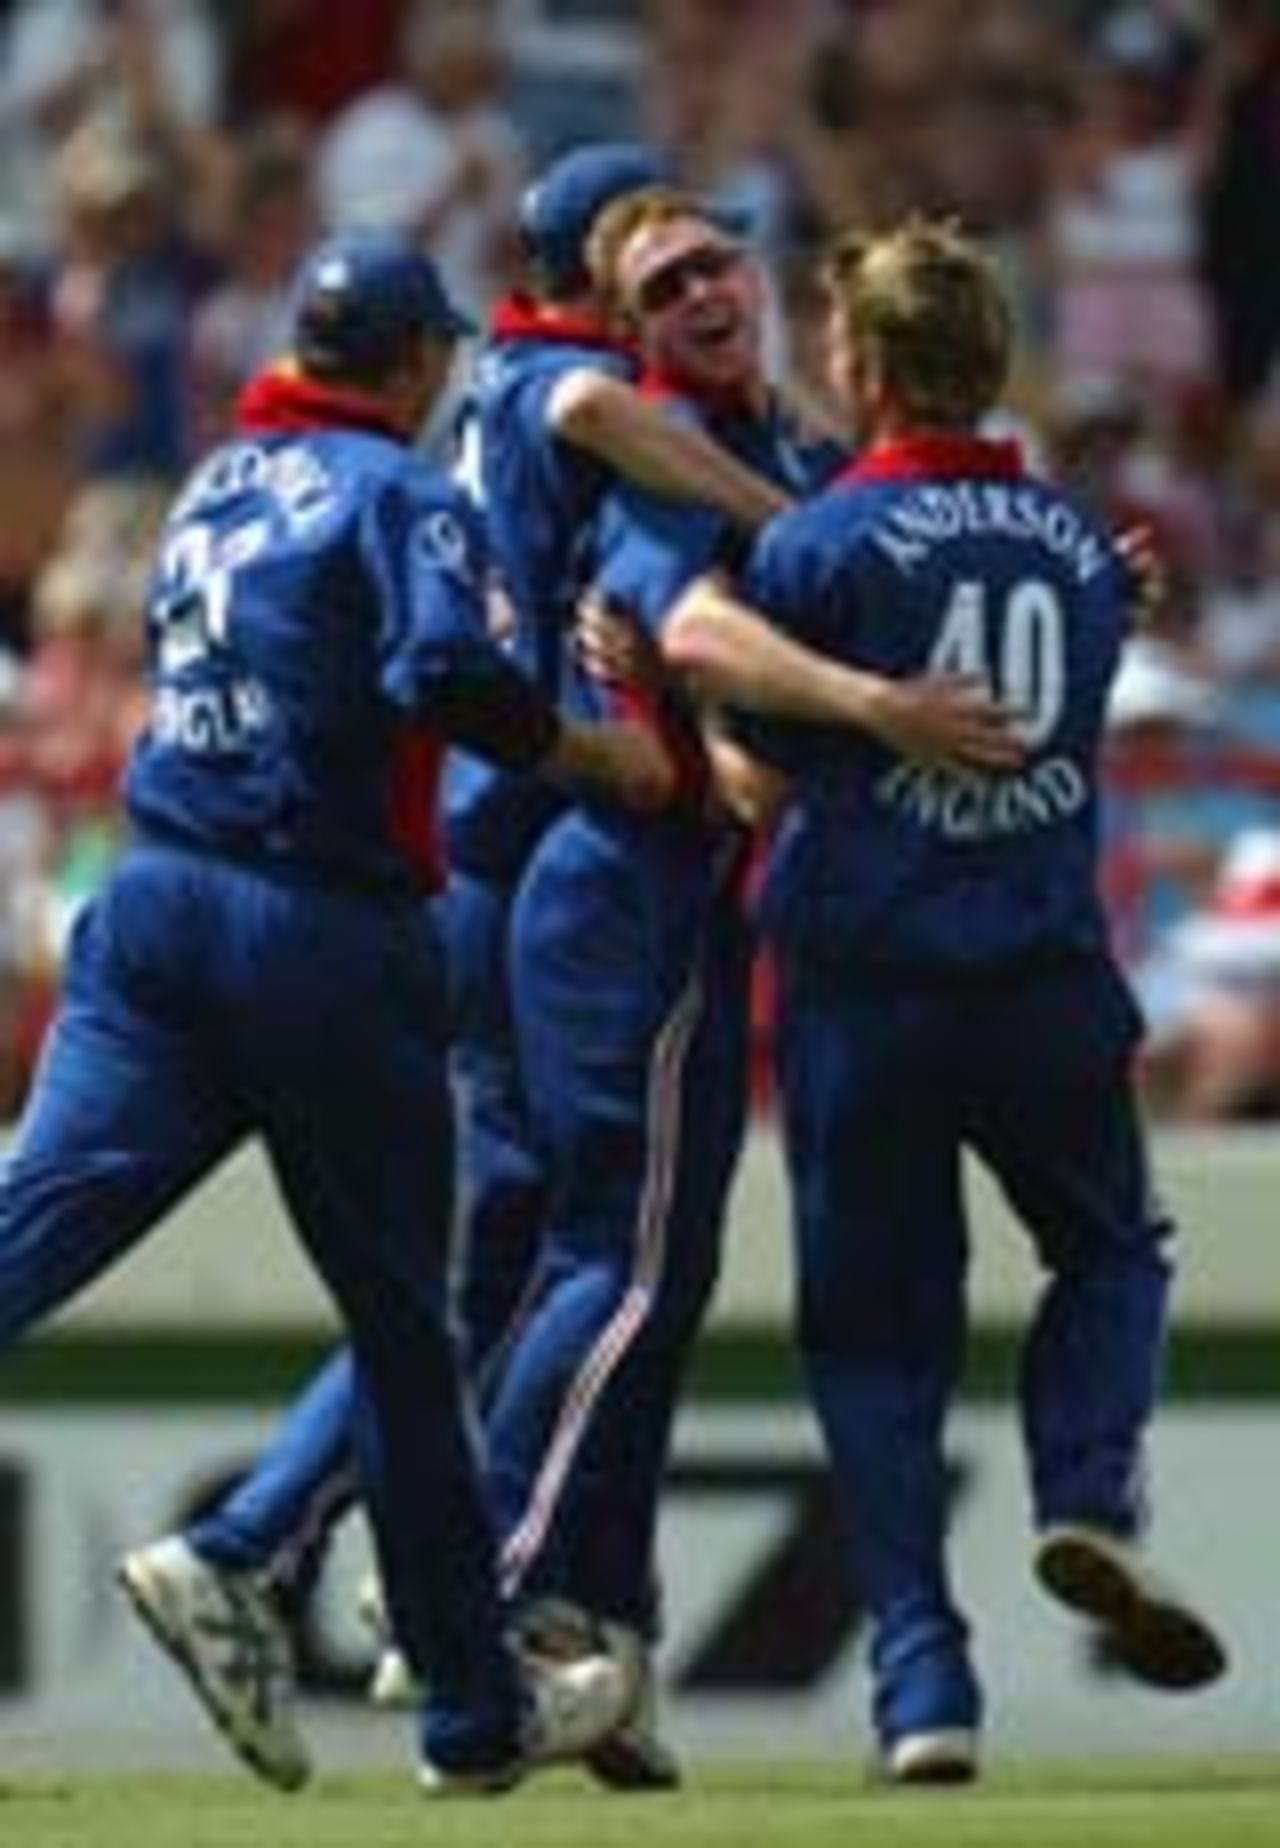 Paul Collingwood celebrates his catch, West Indies v England, 5th ODI, St Lucia, May 1, 2004